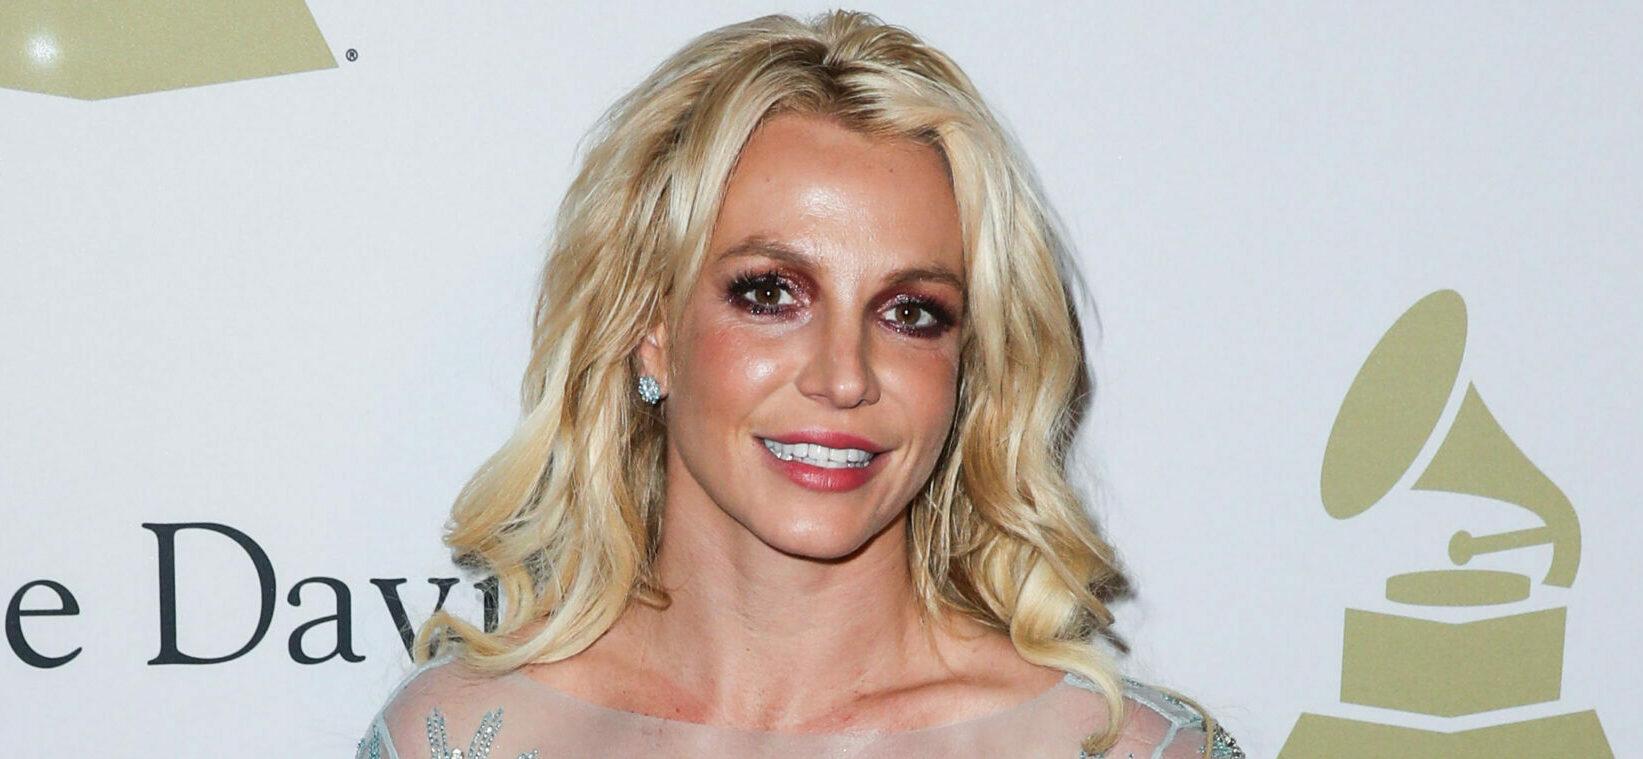 Britney Spears called her baby "fetus" confusing Instagram